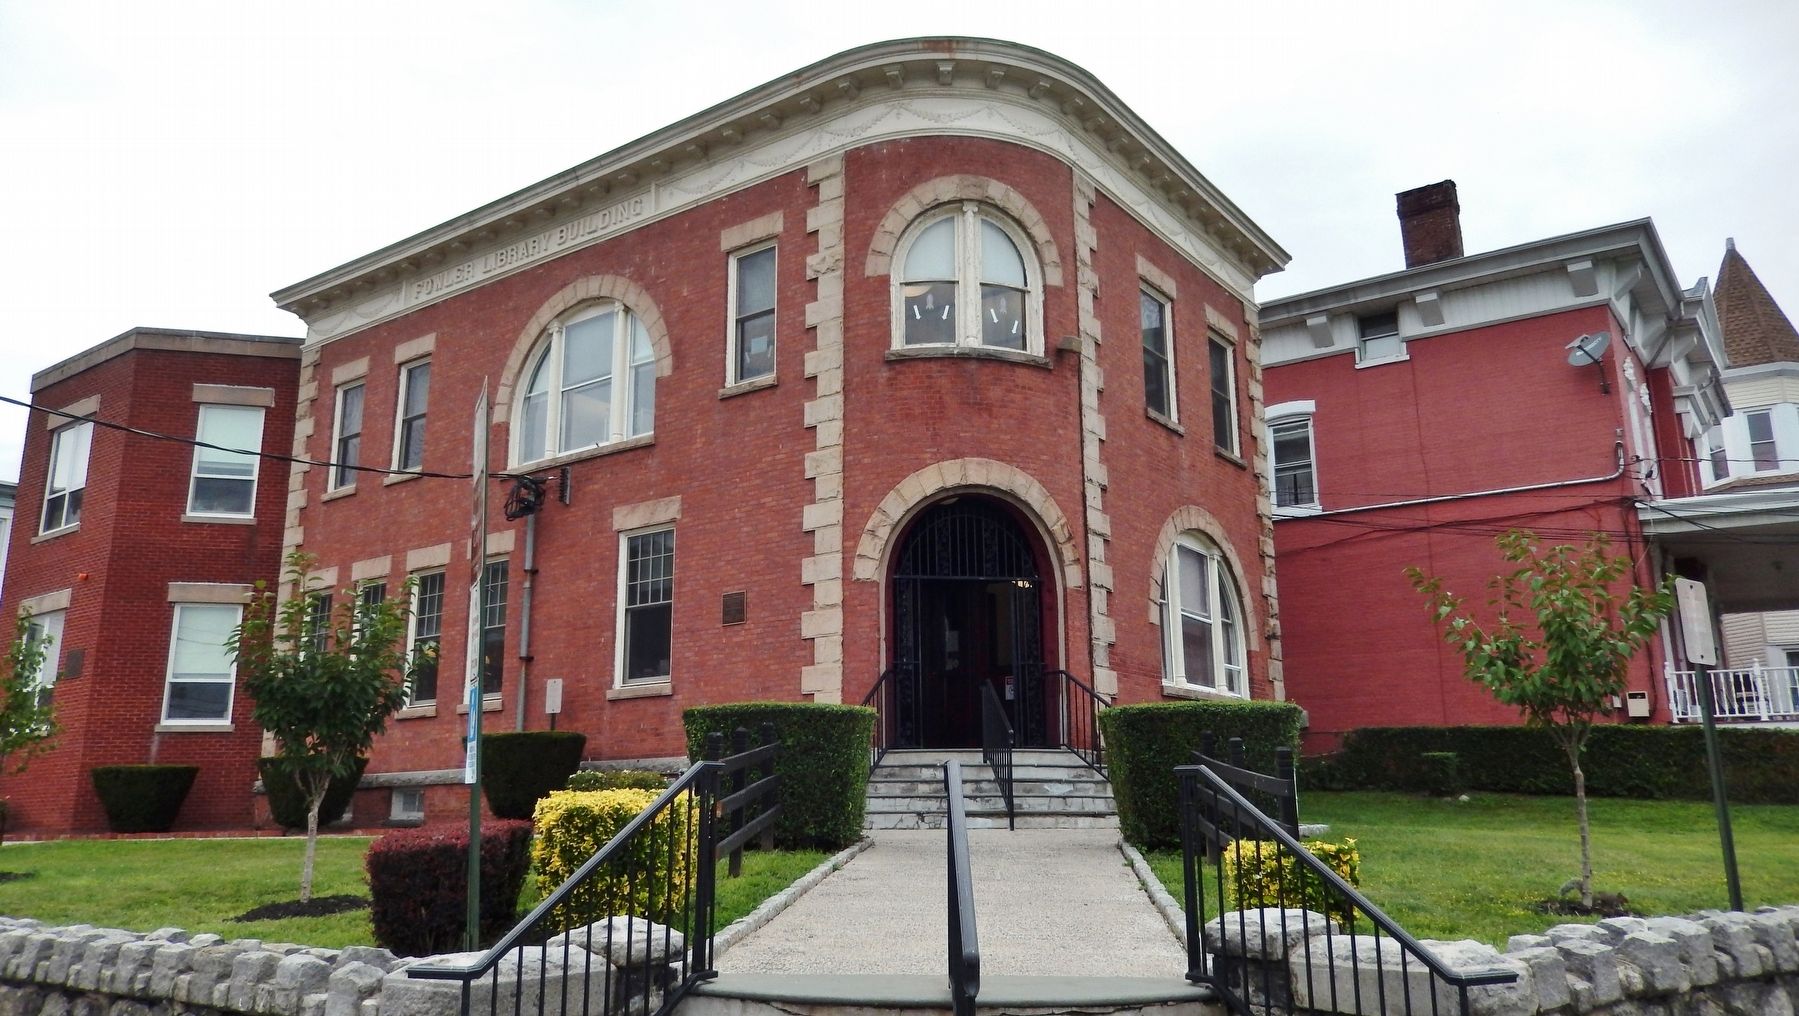 Haverstraw King's Daughters Public Library (<i>southeast corner view</i>) image. Click for full size.